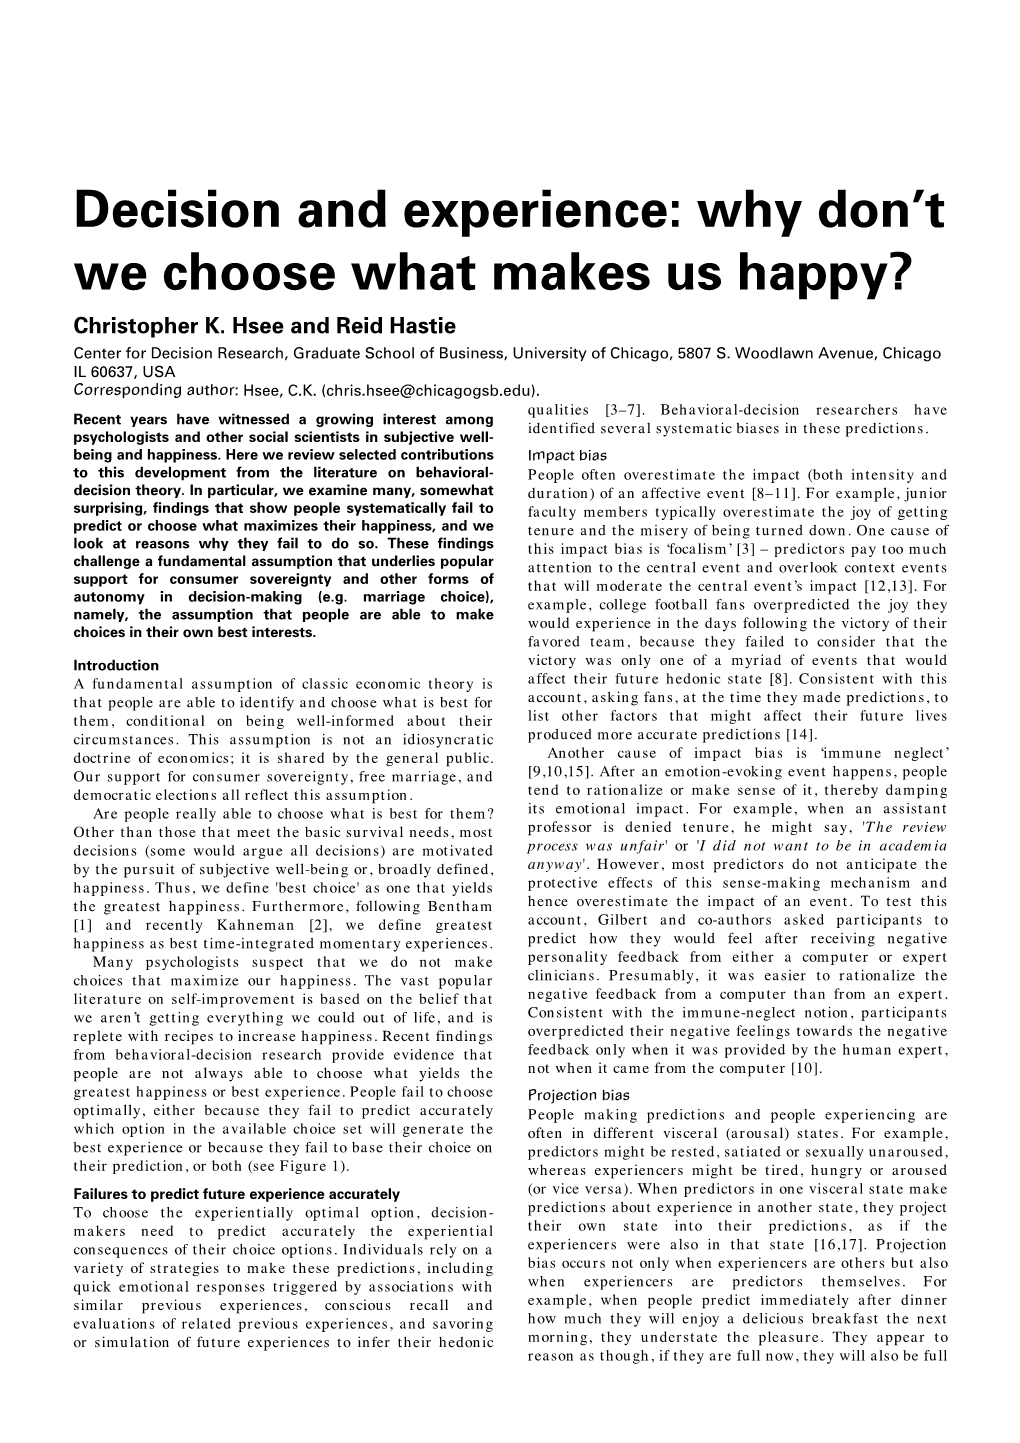 Decision and Experience: Why Don't We Choose What Makes Us Happy?